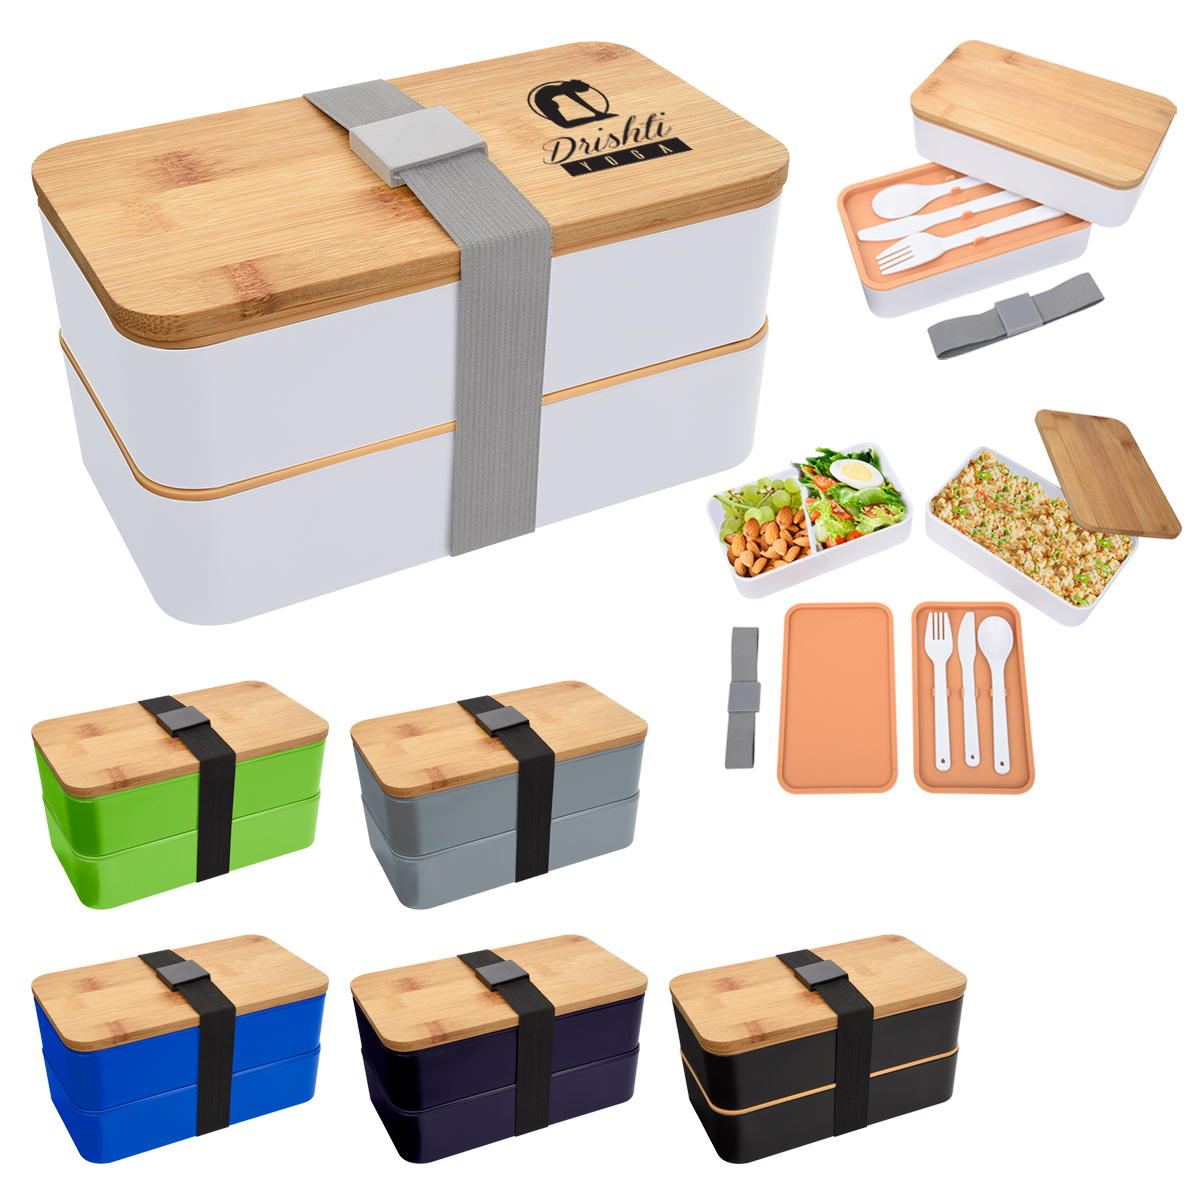 bento lunch sets with bamboo lids in multiple color variants